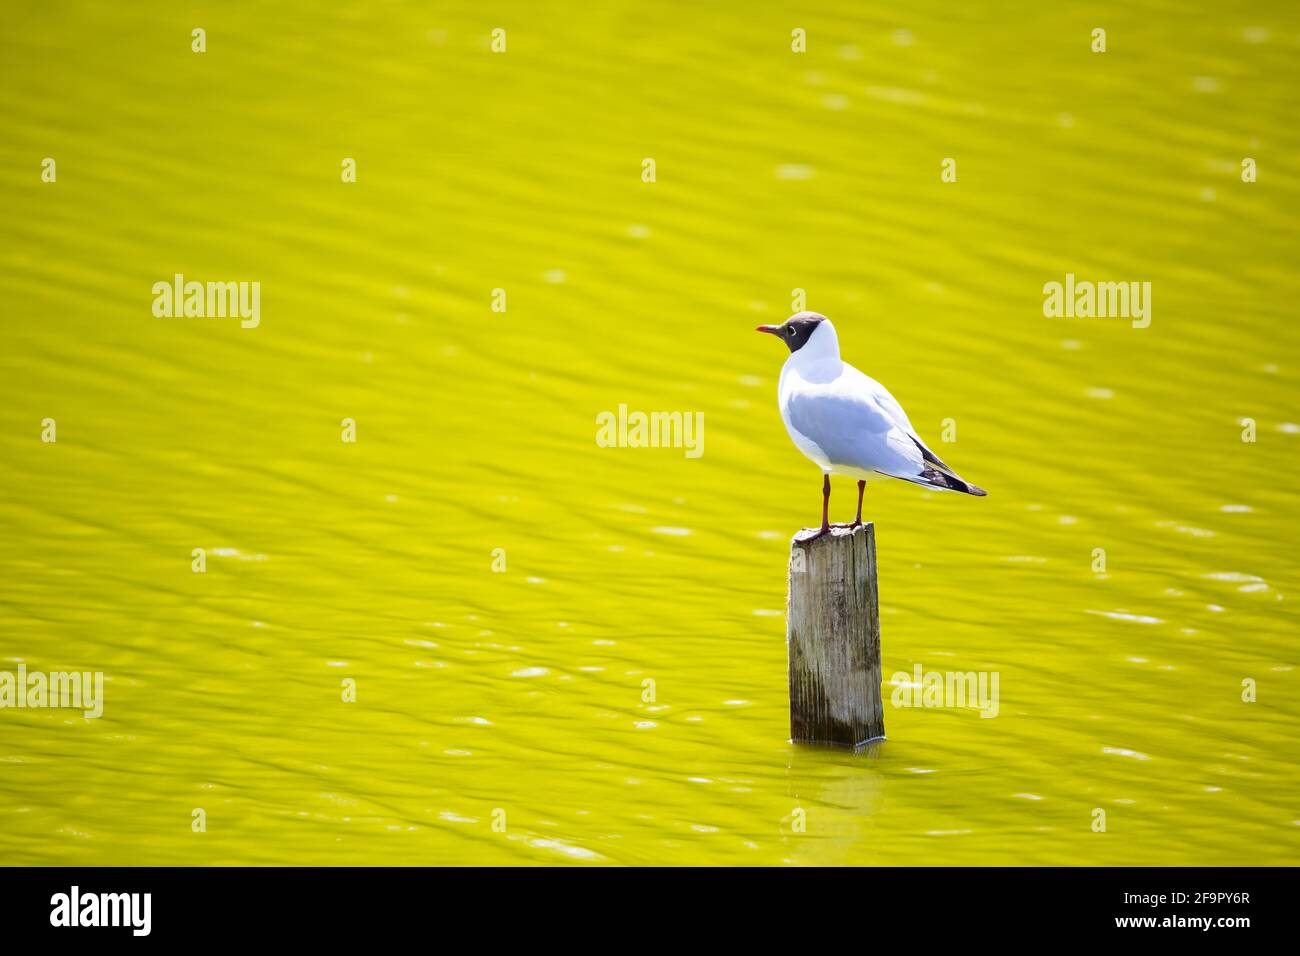 A Black headed gull perched on a fence post on a green lake Stock Photo